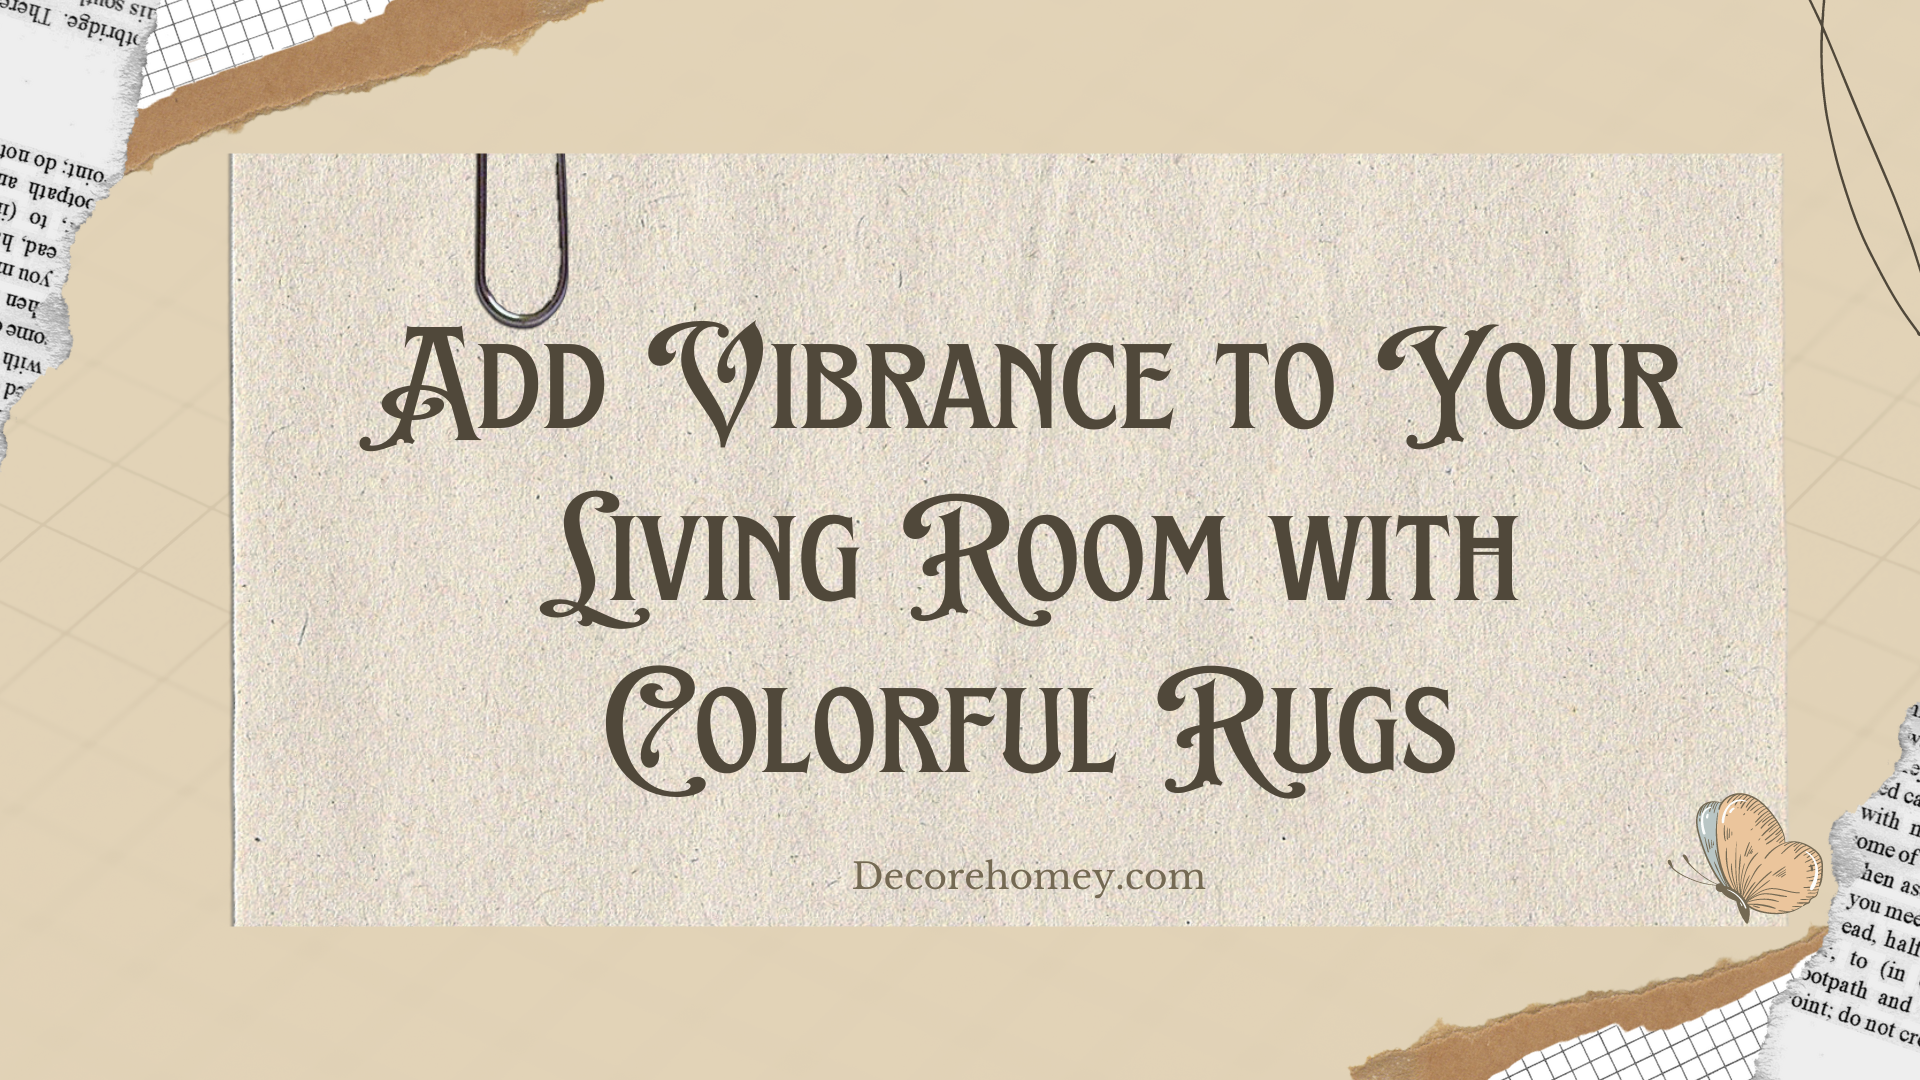 You are currently viewing Add Vibrancy to Your Living Room with Colorful Rugs